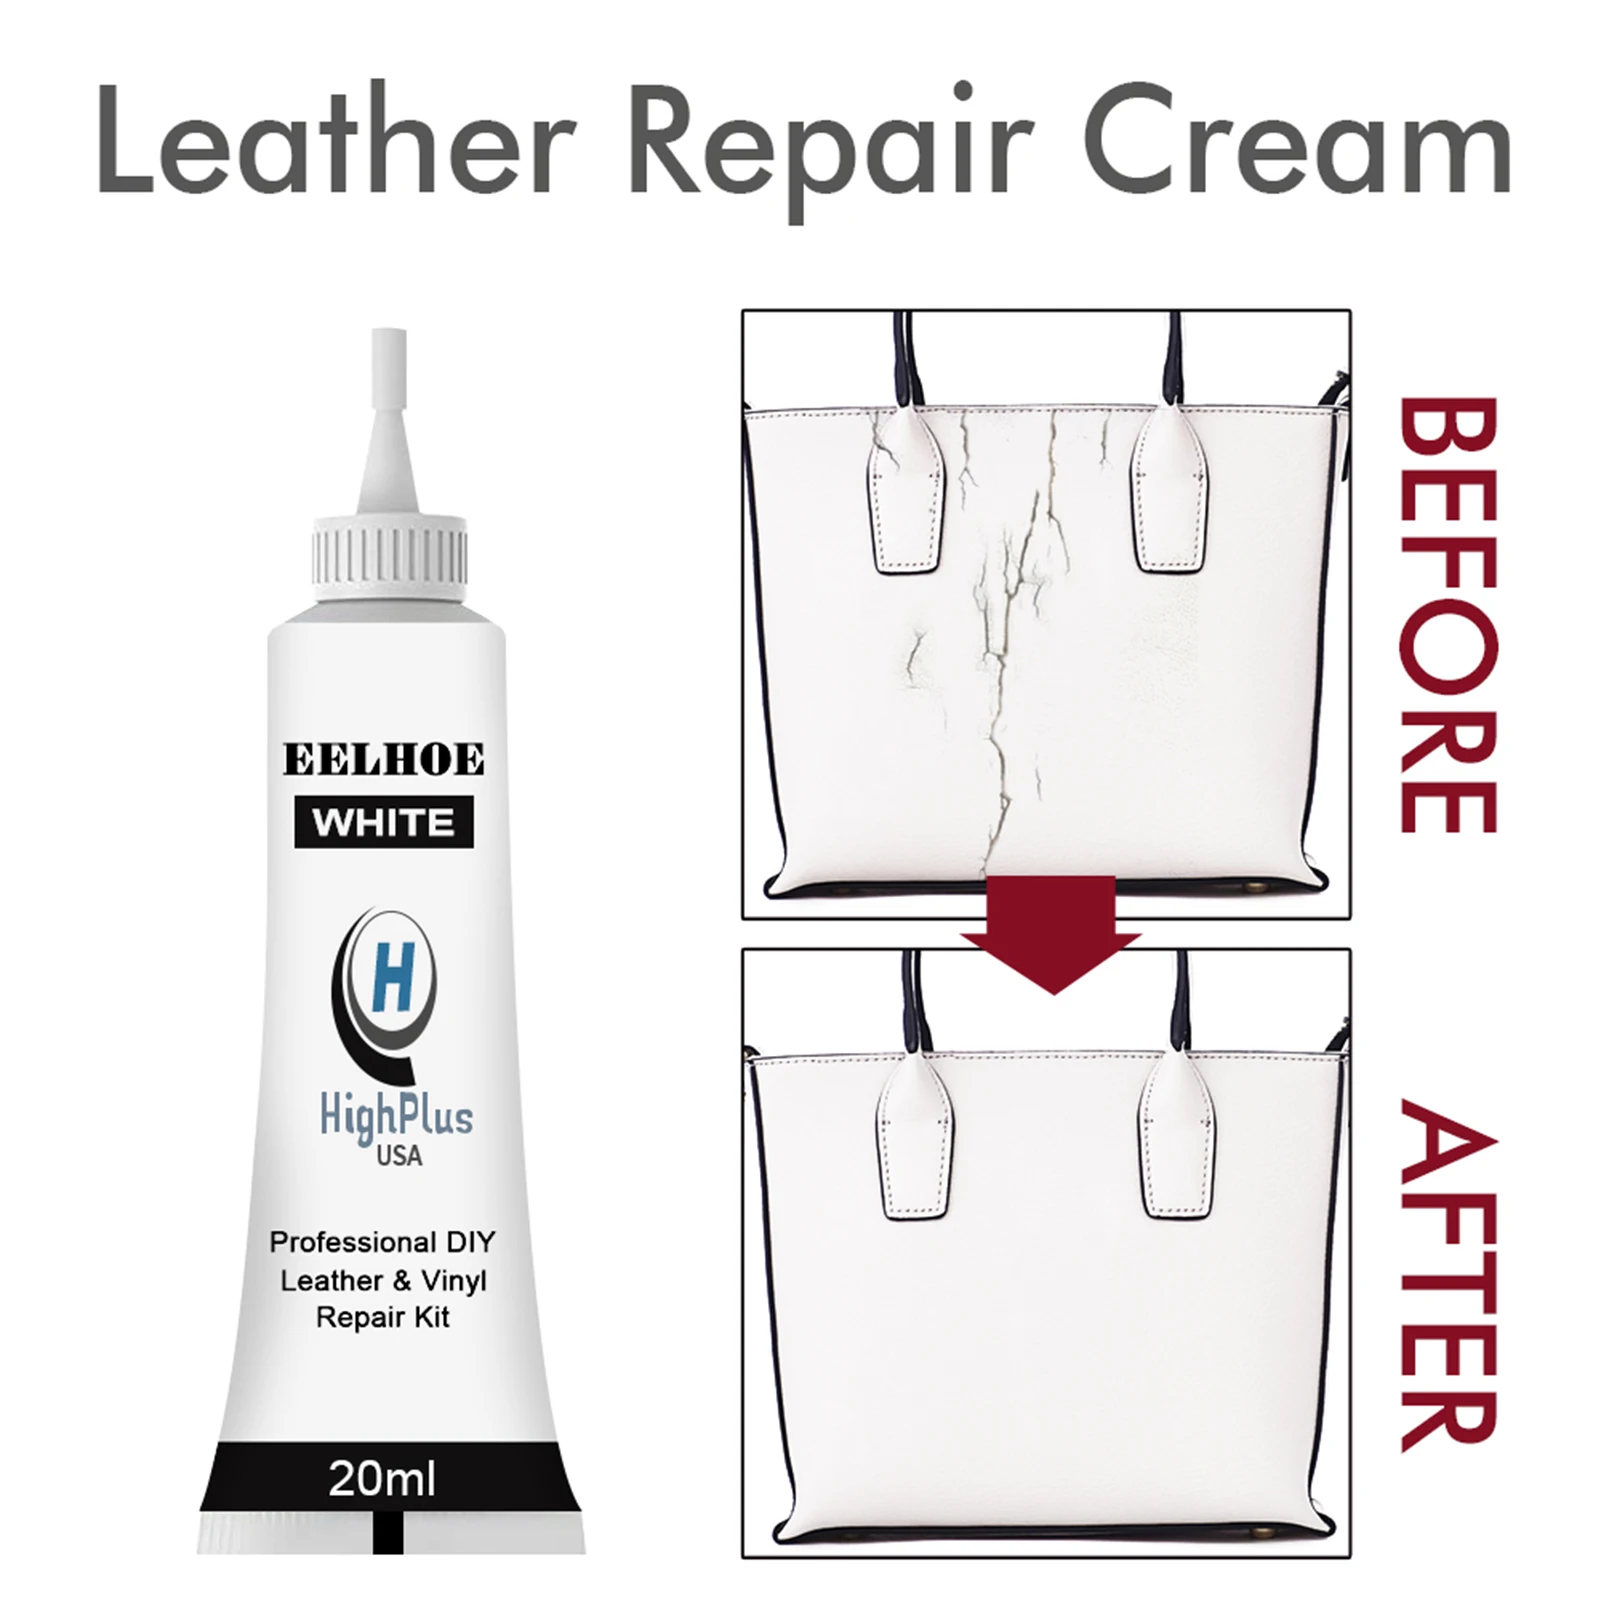 Leather And Vinyl Repair Kit - Furniture, Couch, Car Seats, Sofa, Jacket  Scratch Repair Cream 2PCS Black White Drop Shipping - AliExpress